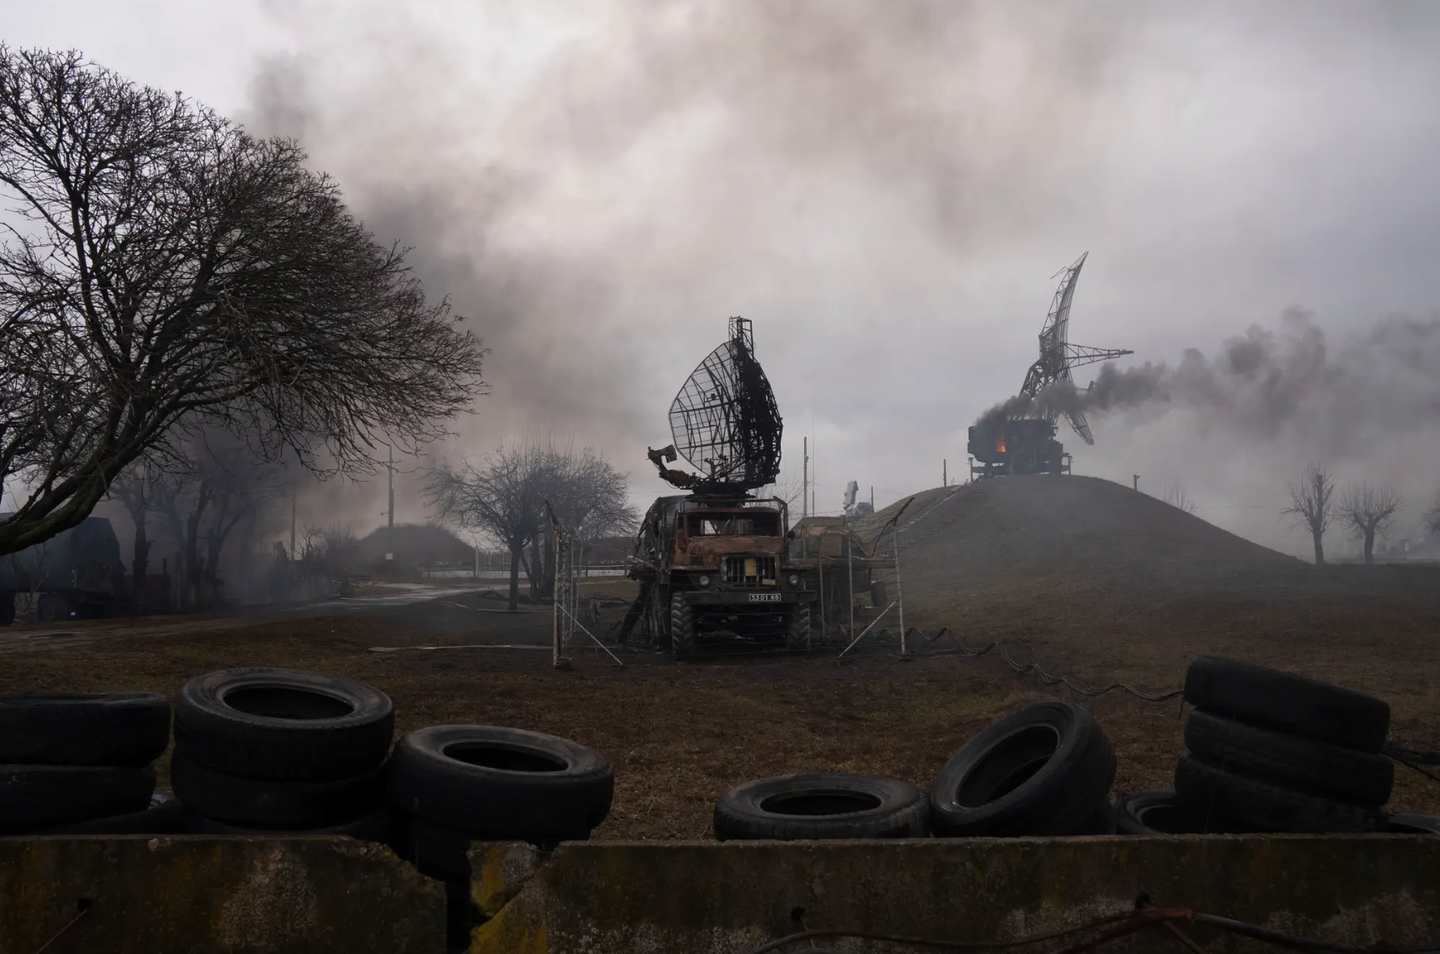 Smoke rises from an air defense site in the aftermath of an apparent Russian strike in Mariupol, Ukraine, on the first day of the conflict.&nbsp;<em>AP Photo/Evgeniy Maloletka</em>